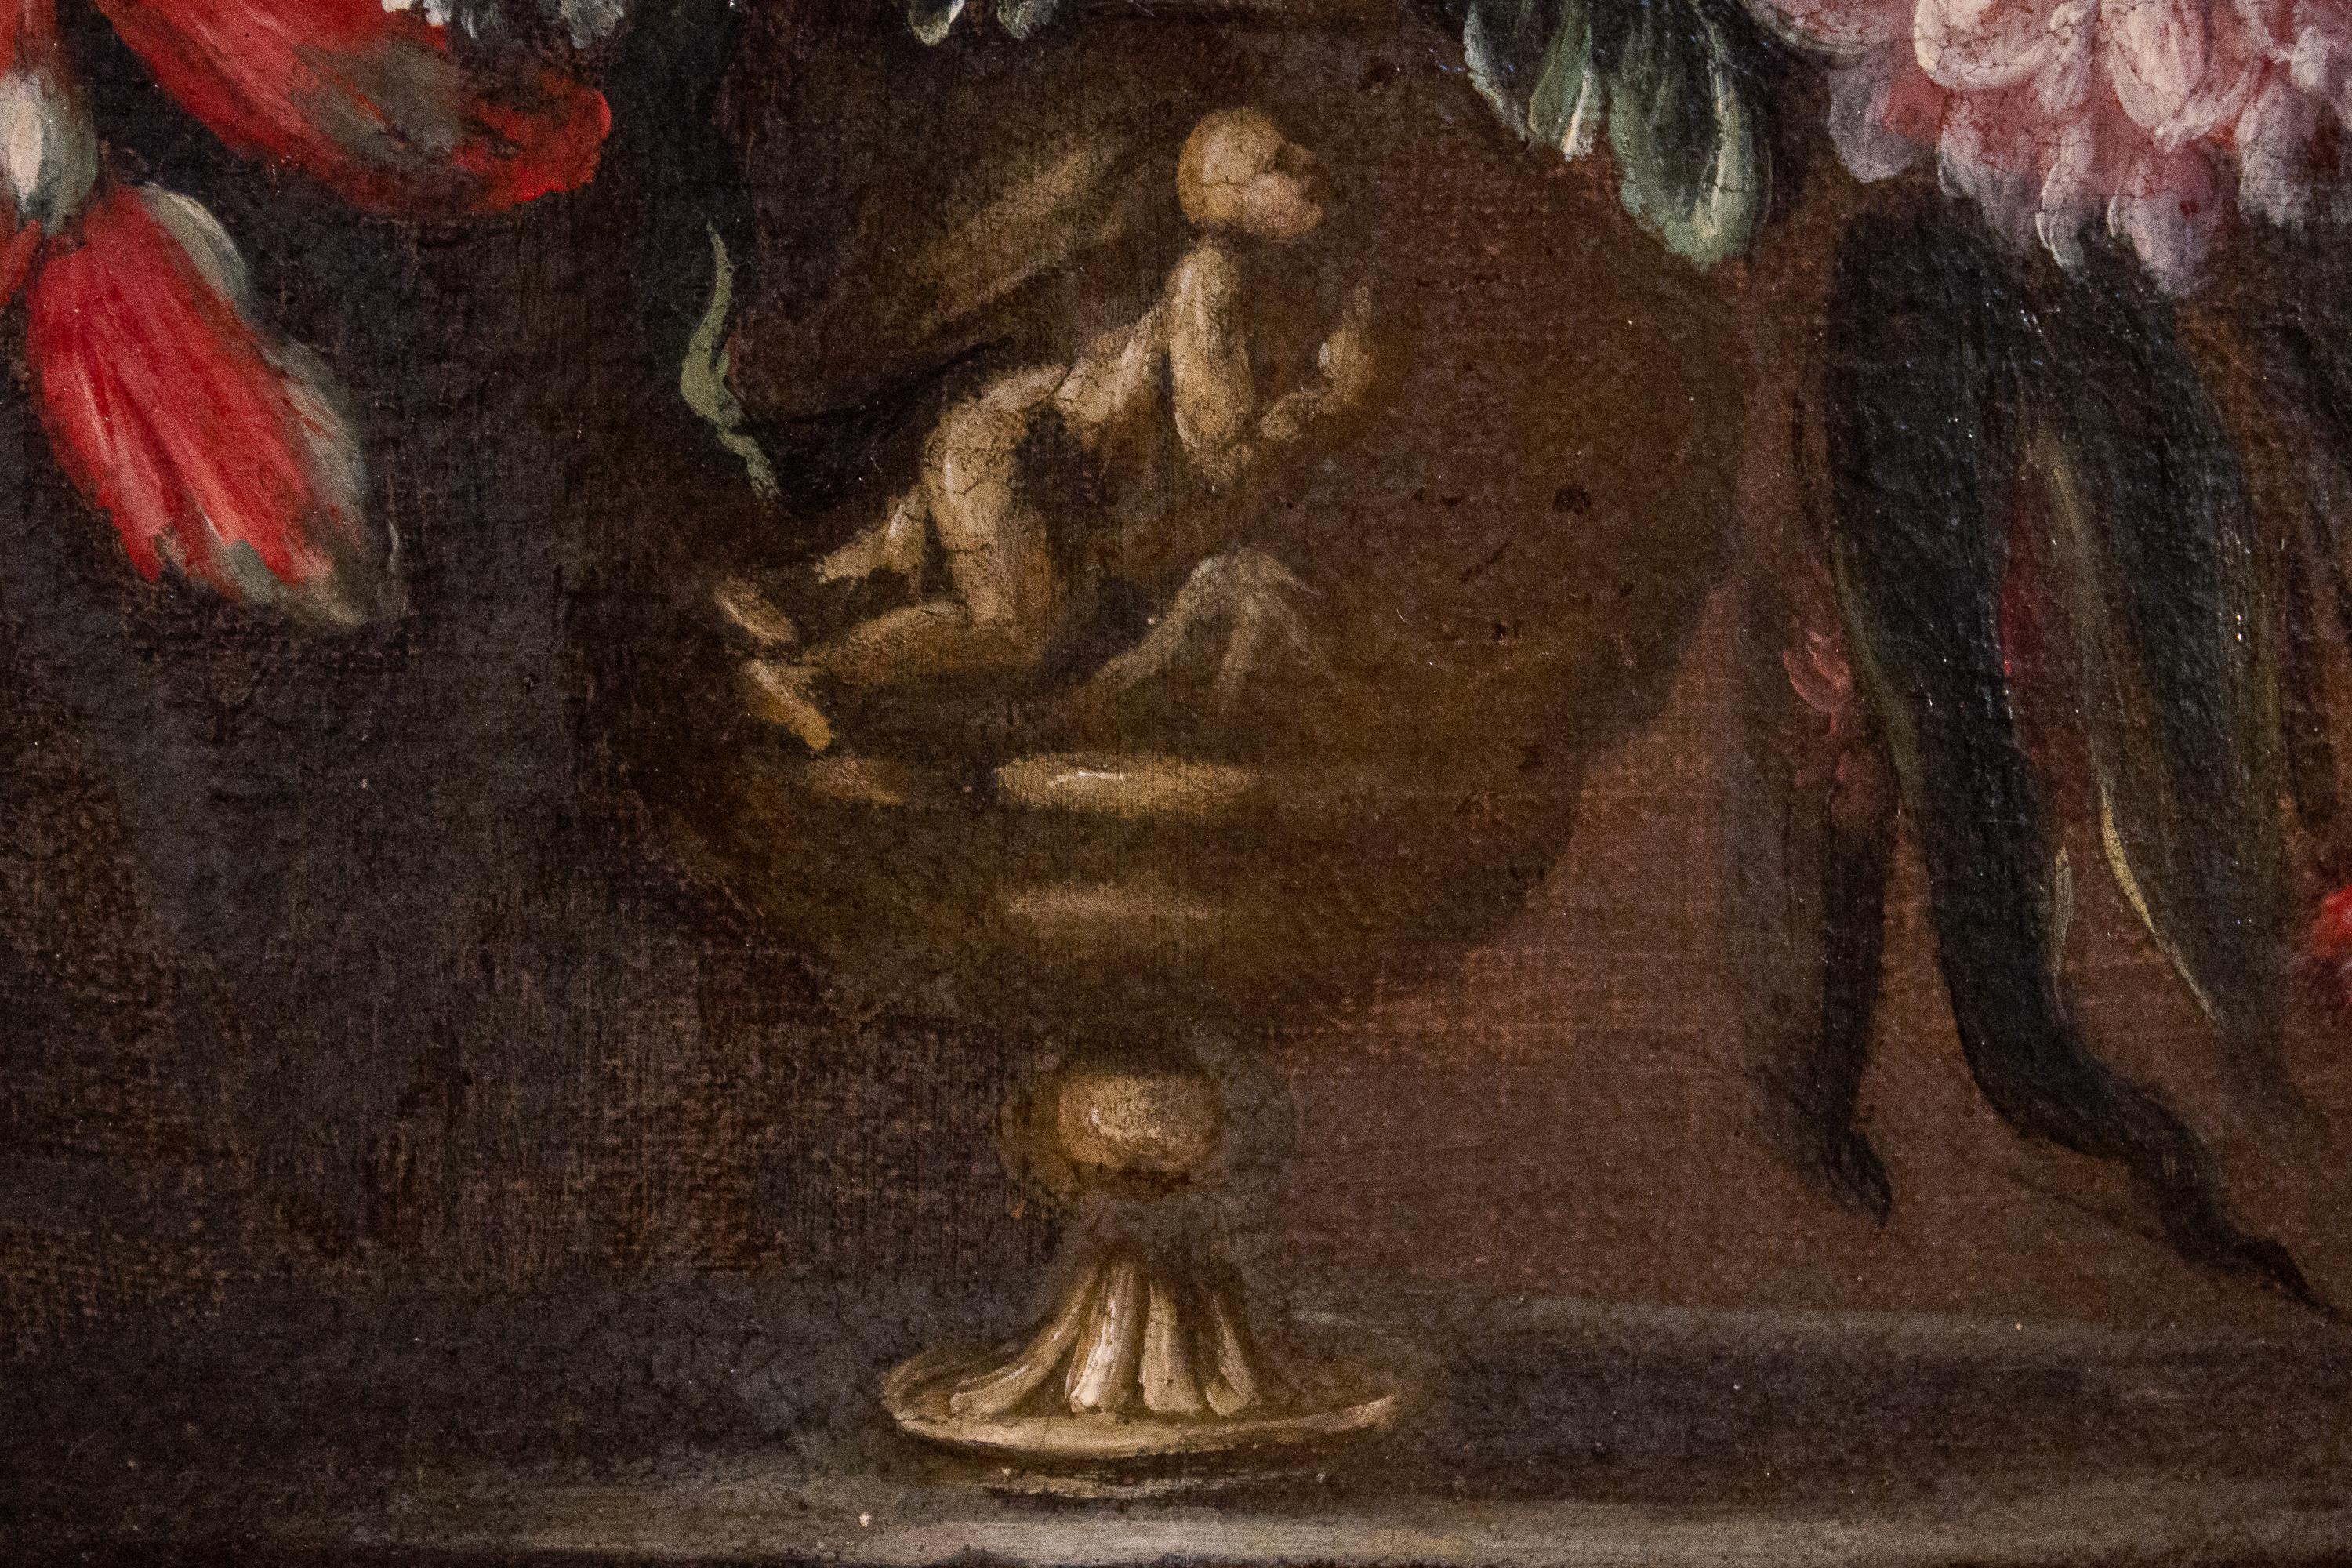 Pair of very decorative Italian Still-life paintings of flowers with vases and classical figures .
18th century, oil on canvas,  with original gilt-wood frames. 
This pair is an excellent example of the Italian  trend of emulating the Flemish still